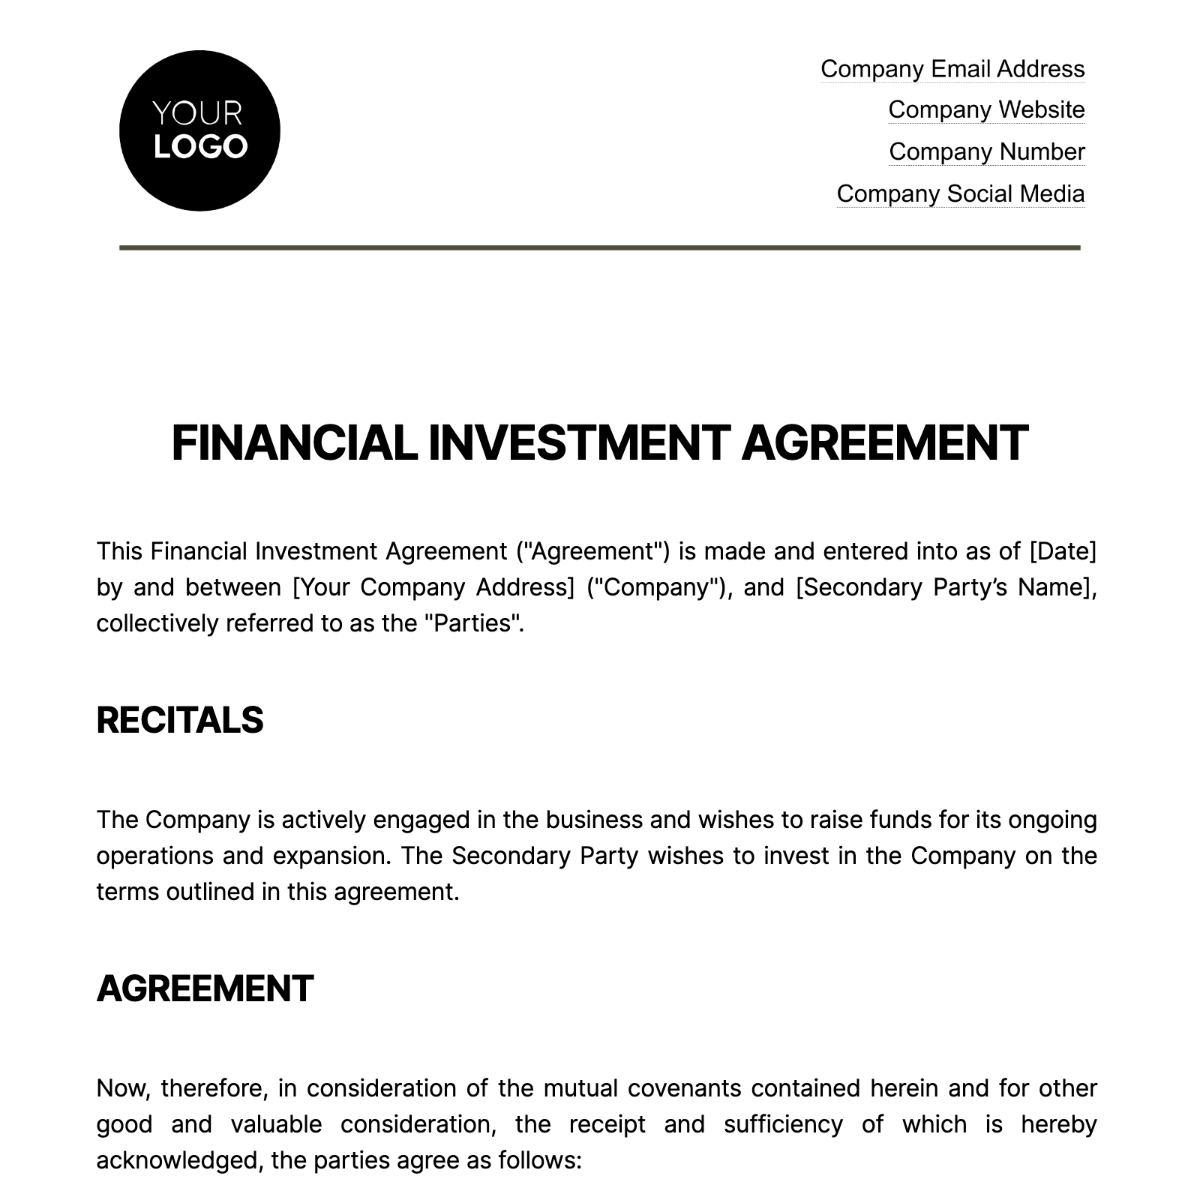 Financial Investment Agreement Template